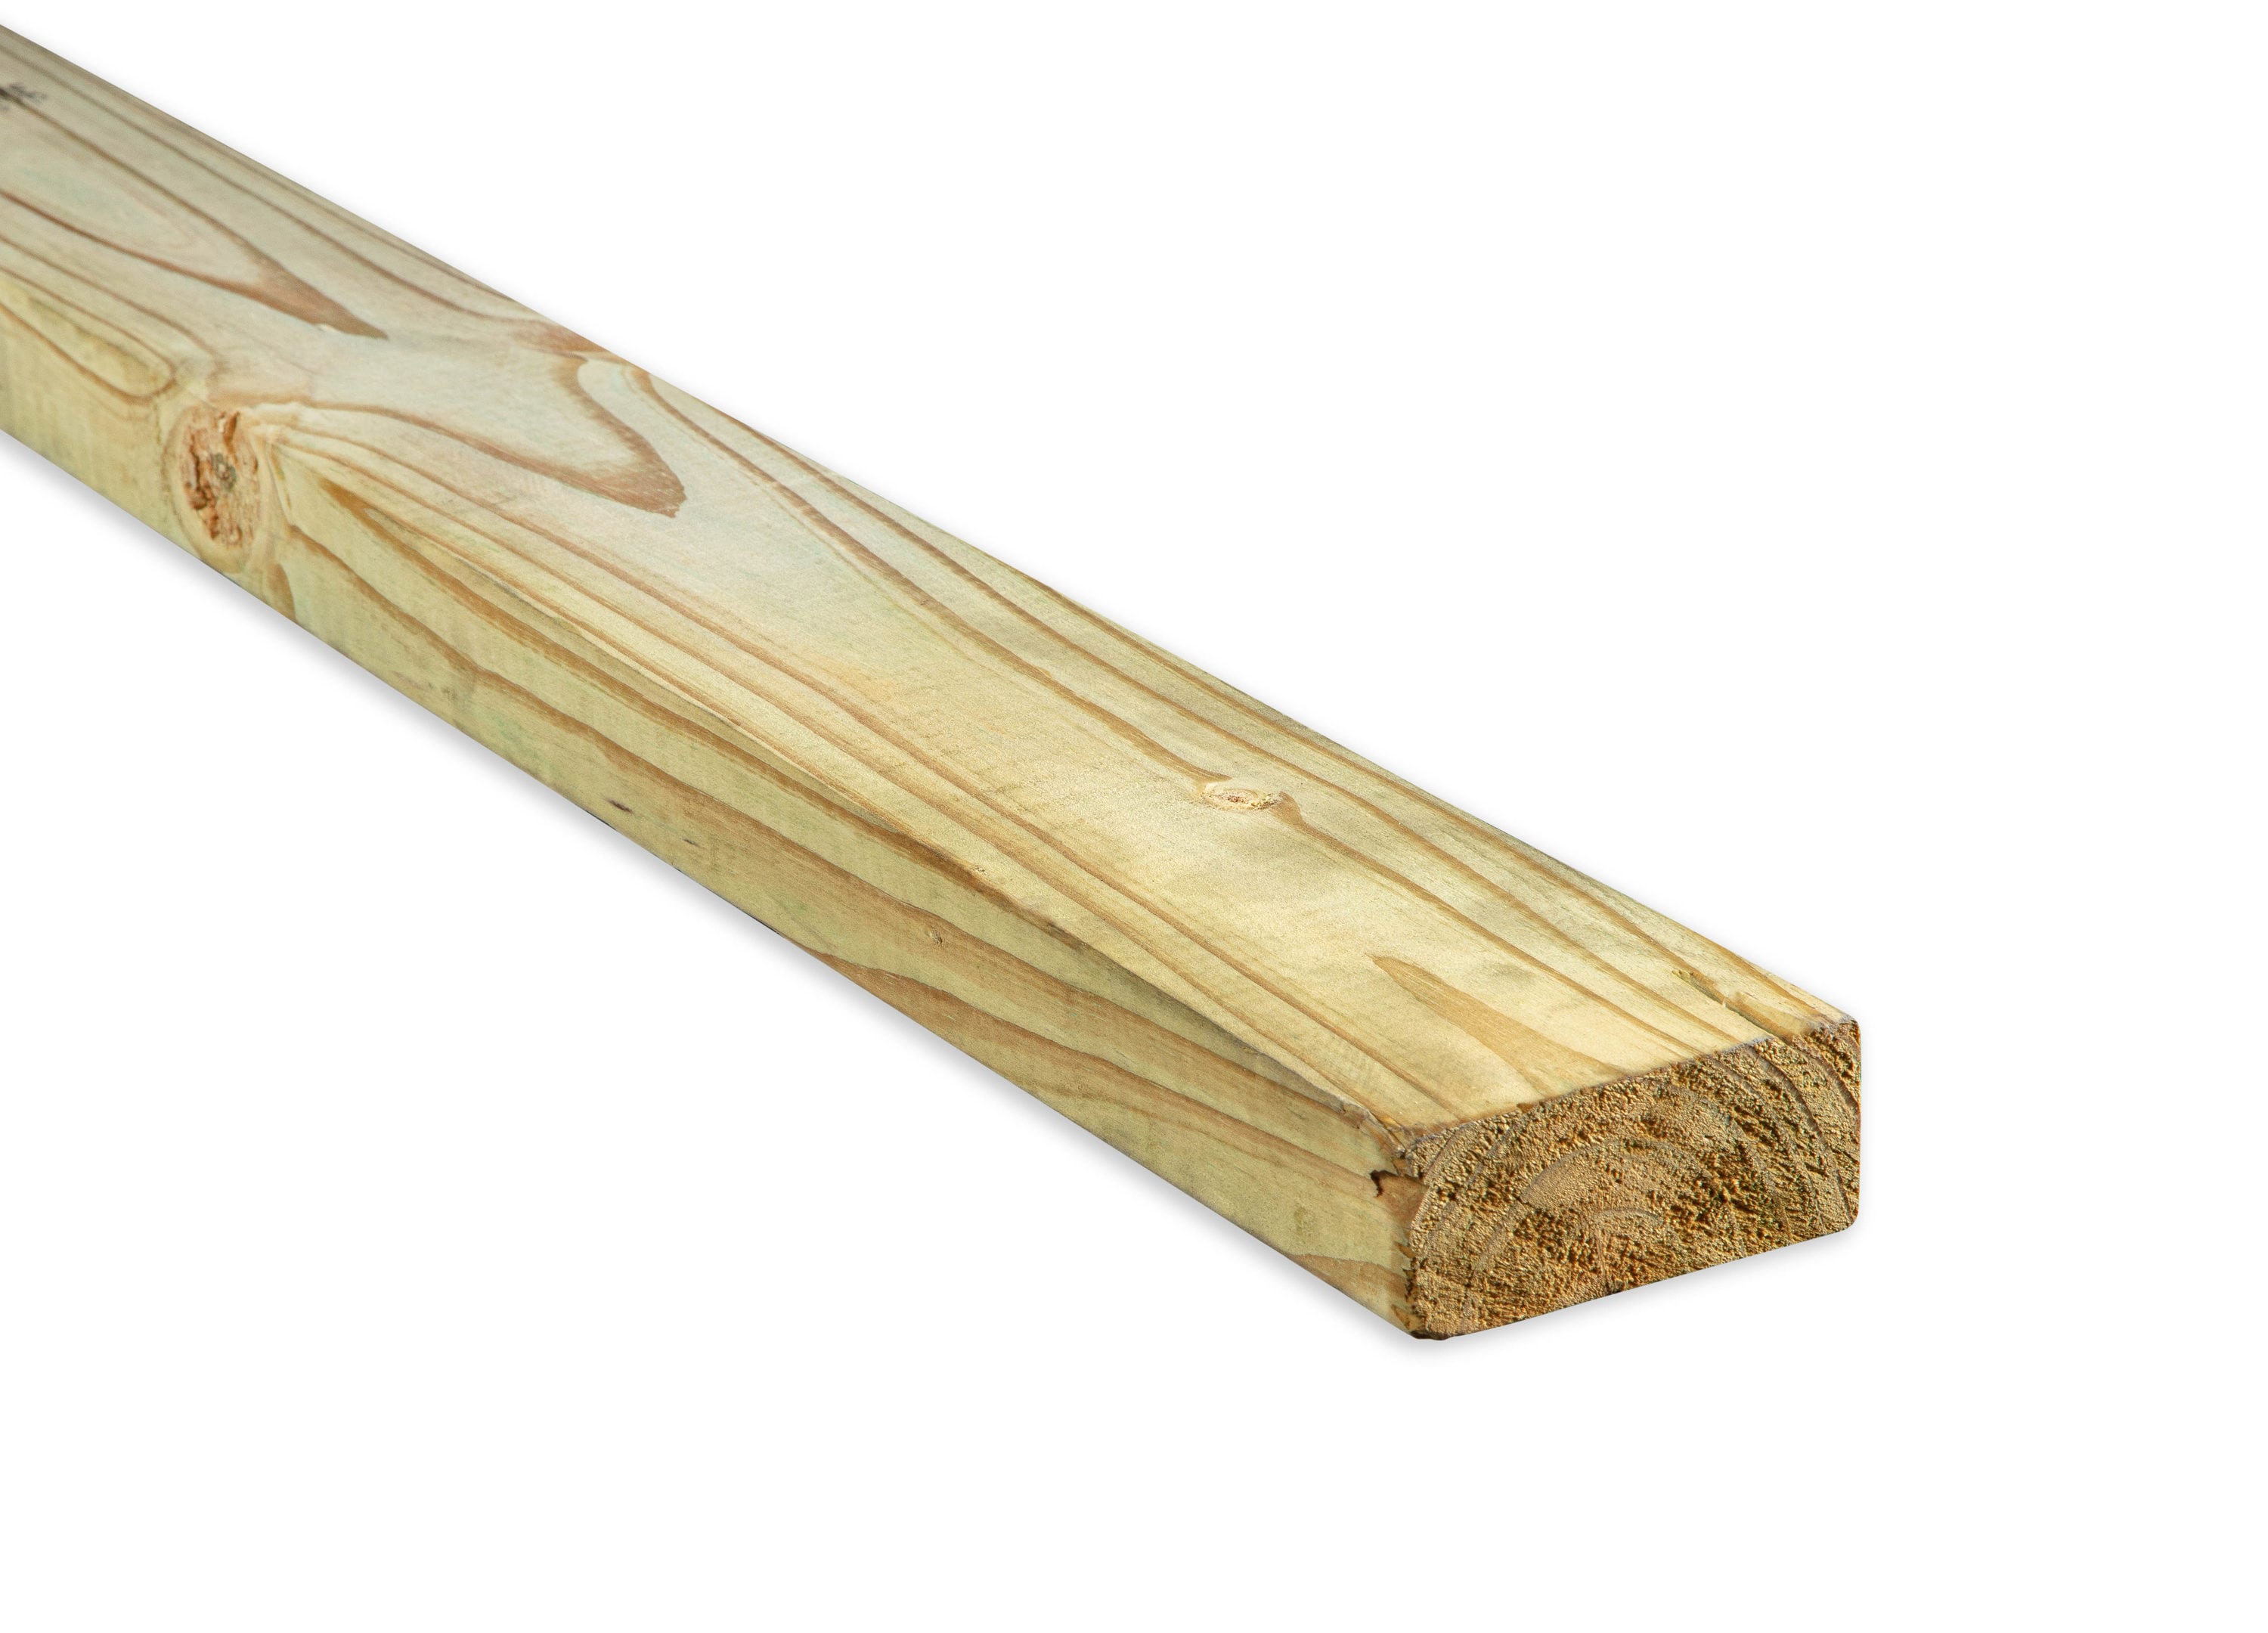 2x4x10 Pressure Treated Lumber At Lowes Com Search Results